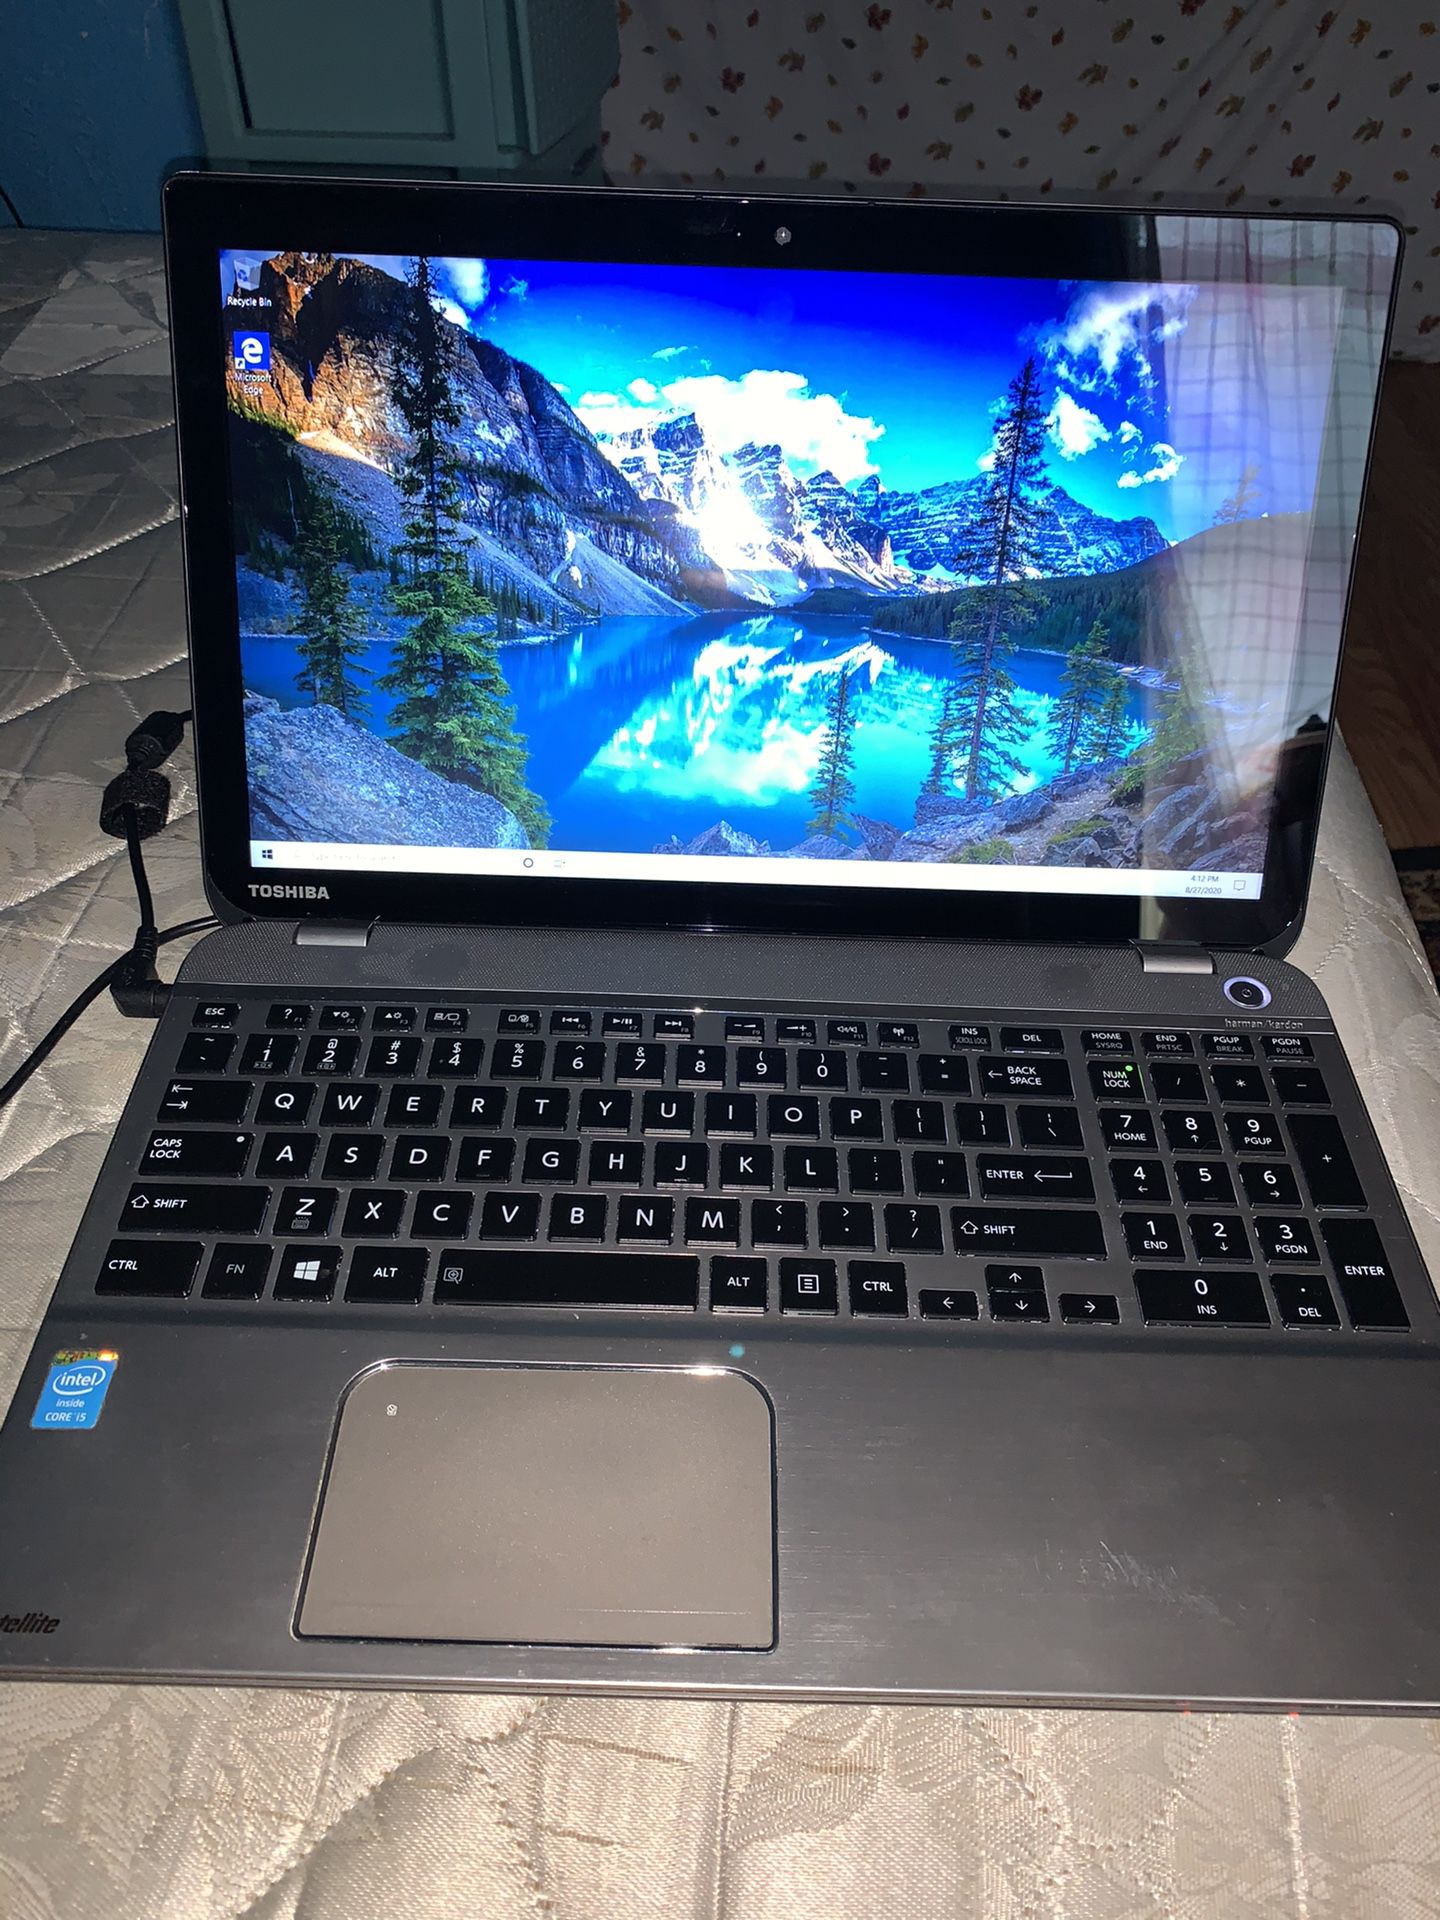 Toshiba Laptop TOUCH SCREEN ( LIKE NEW )